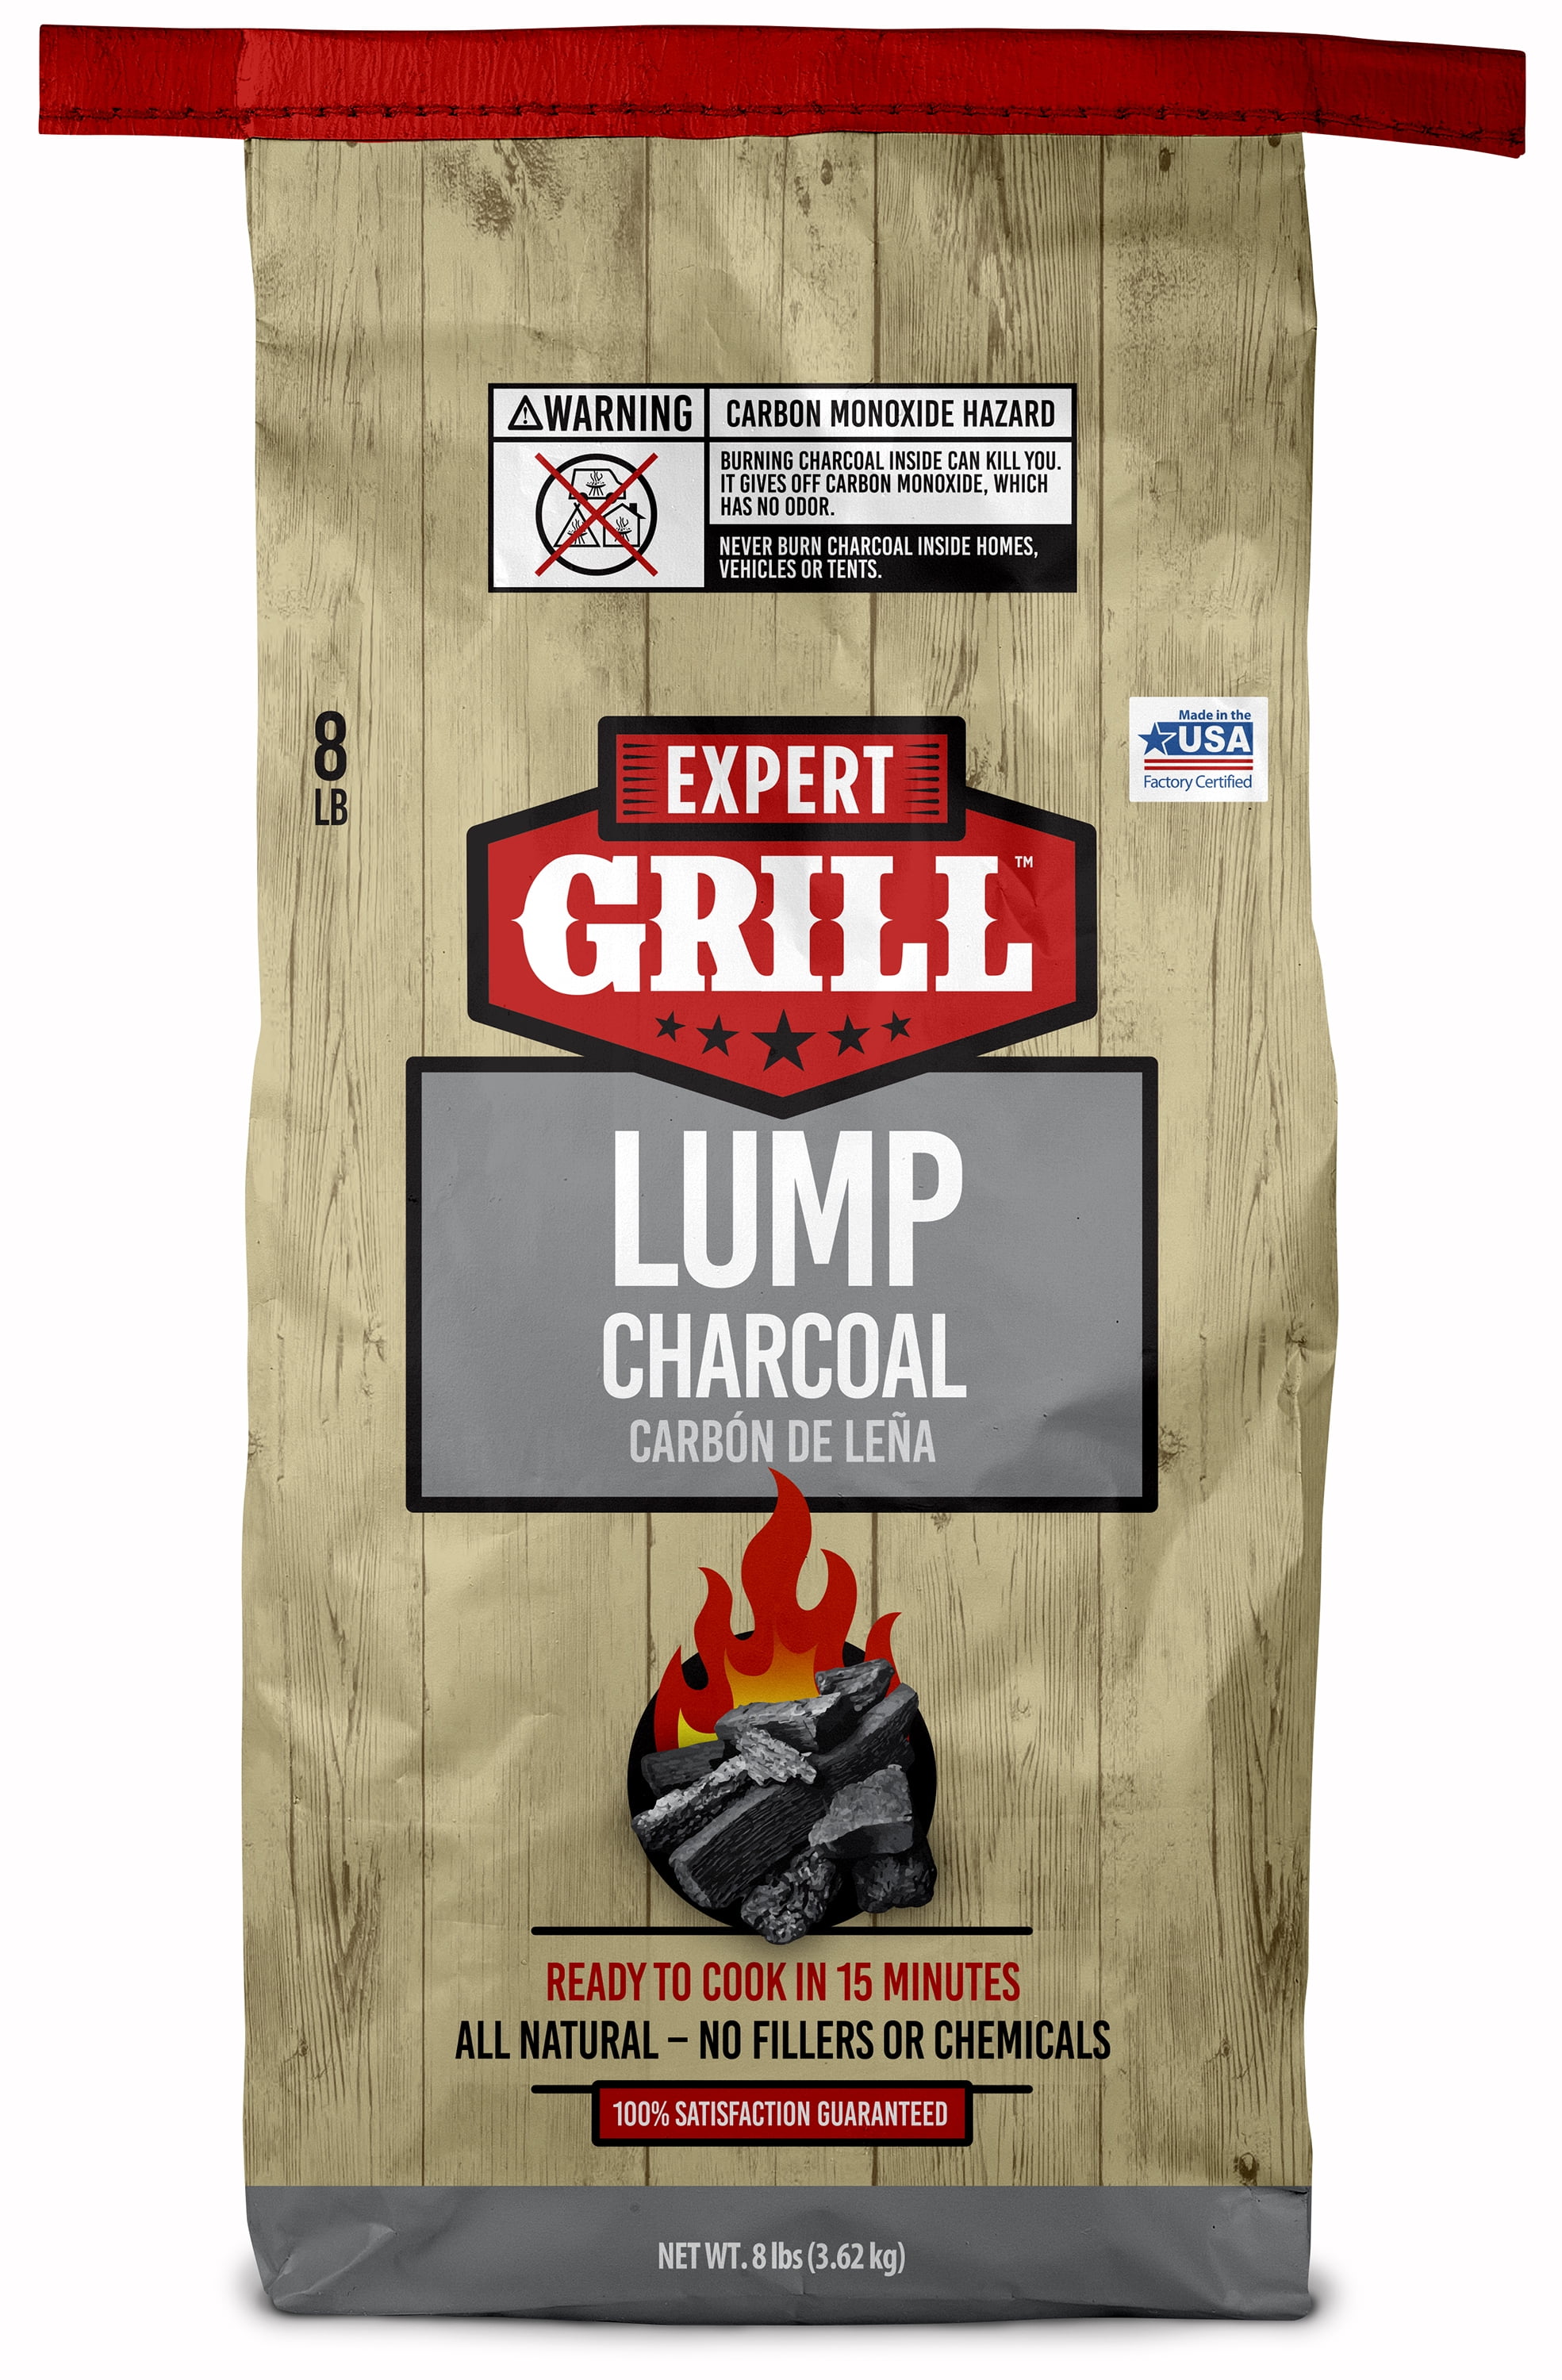 Expert Grill Lump Charcoal, All Natural Hardwood Charcoal, 8 lbs